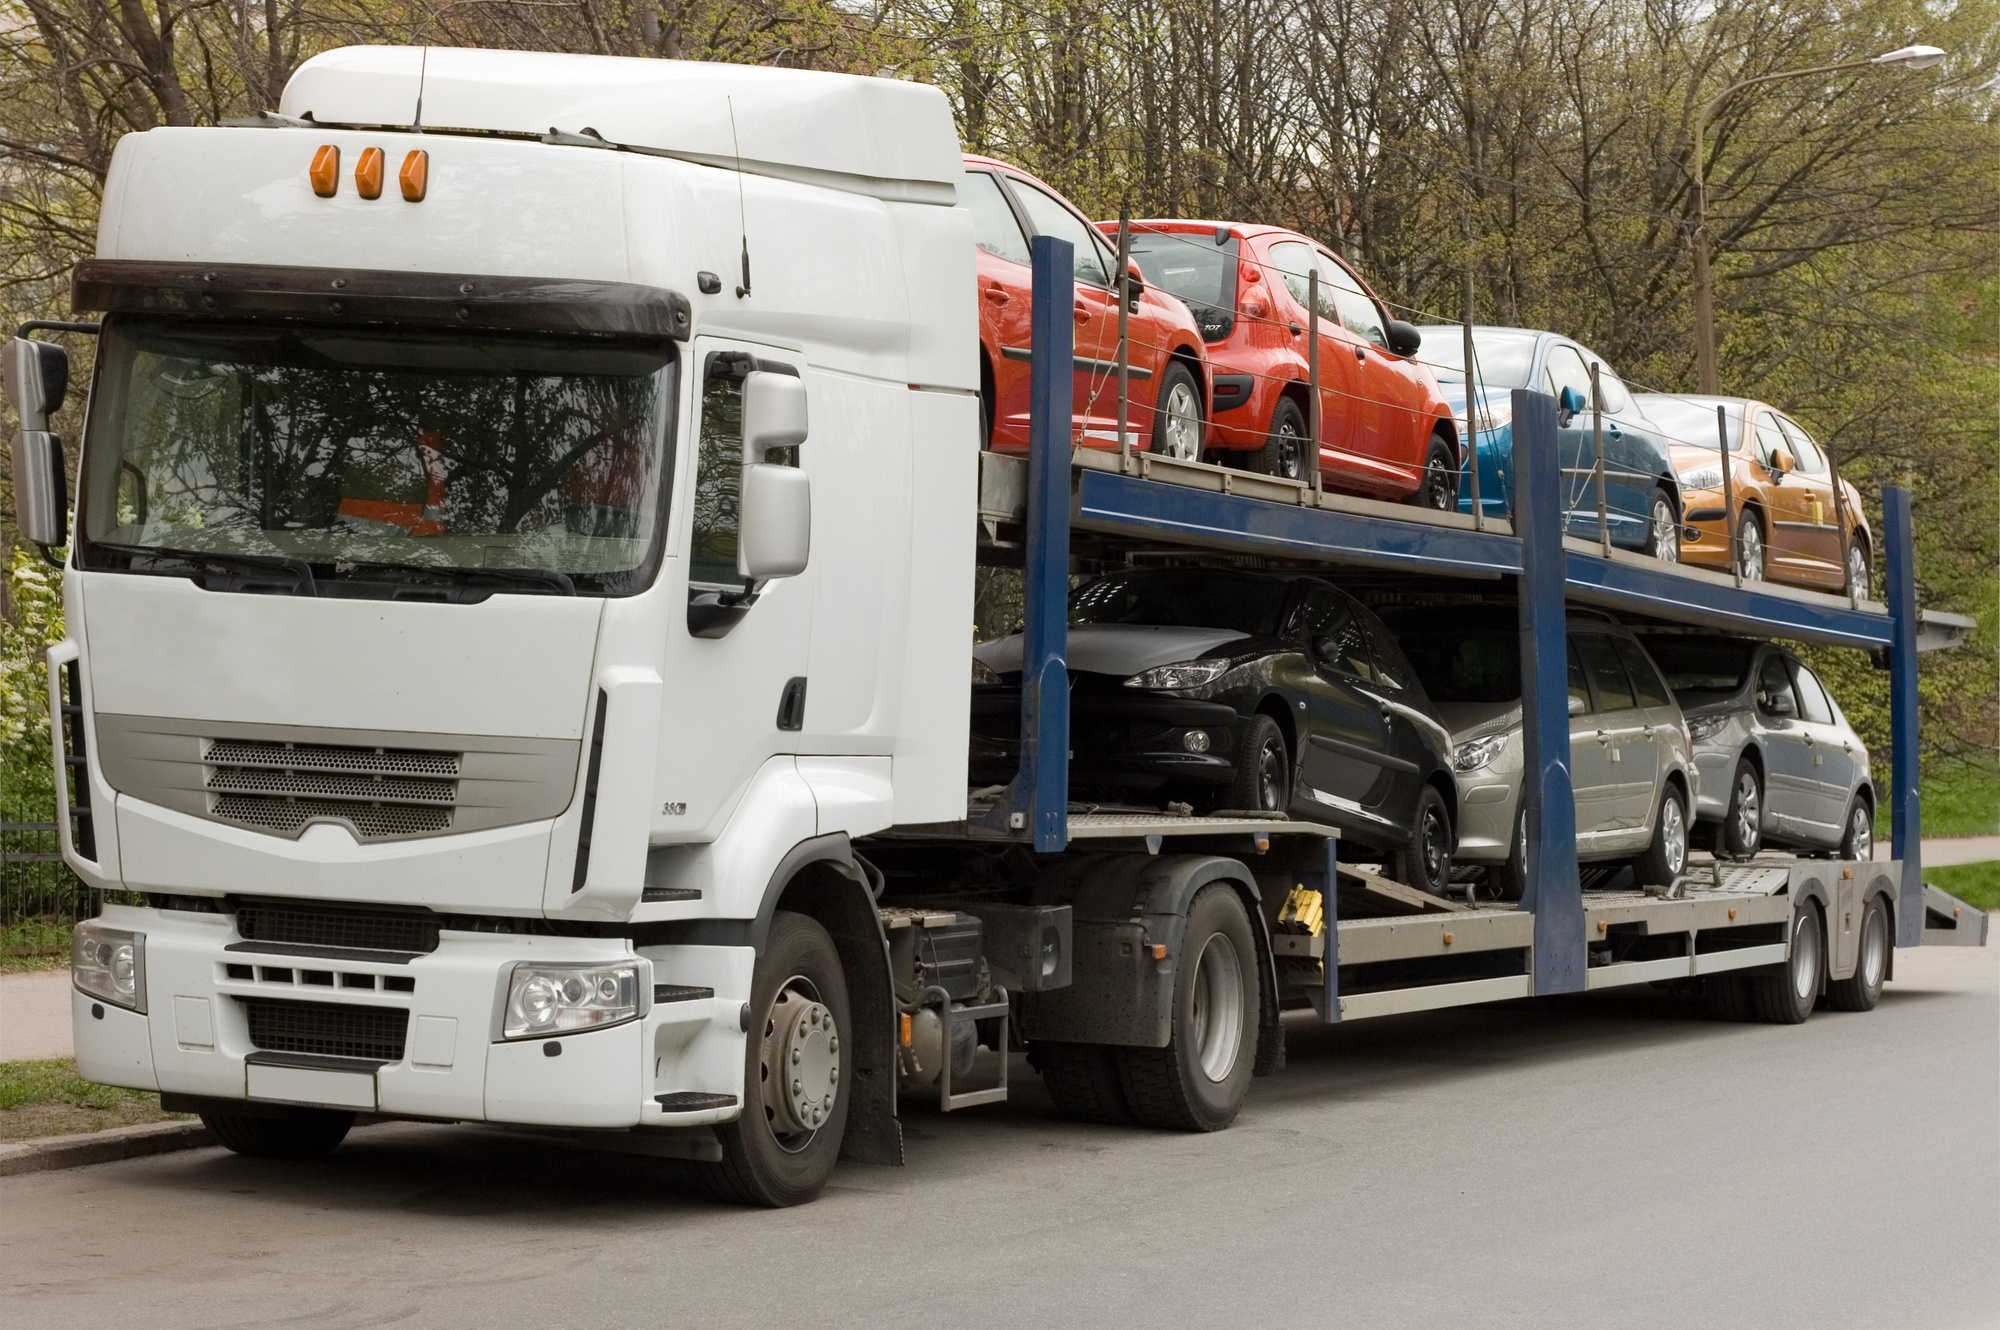 5 Tips for Choosing the Best Car Shipping Company for Your Needs